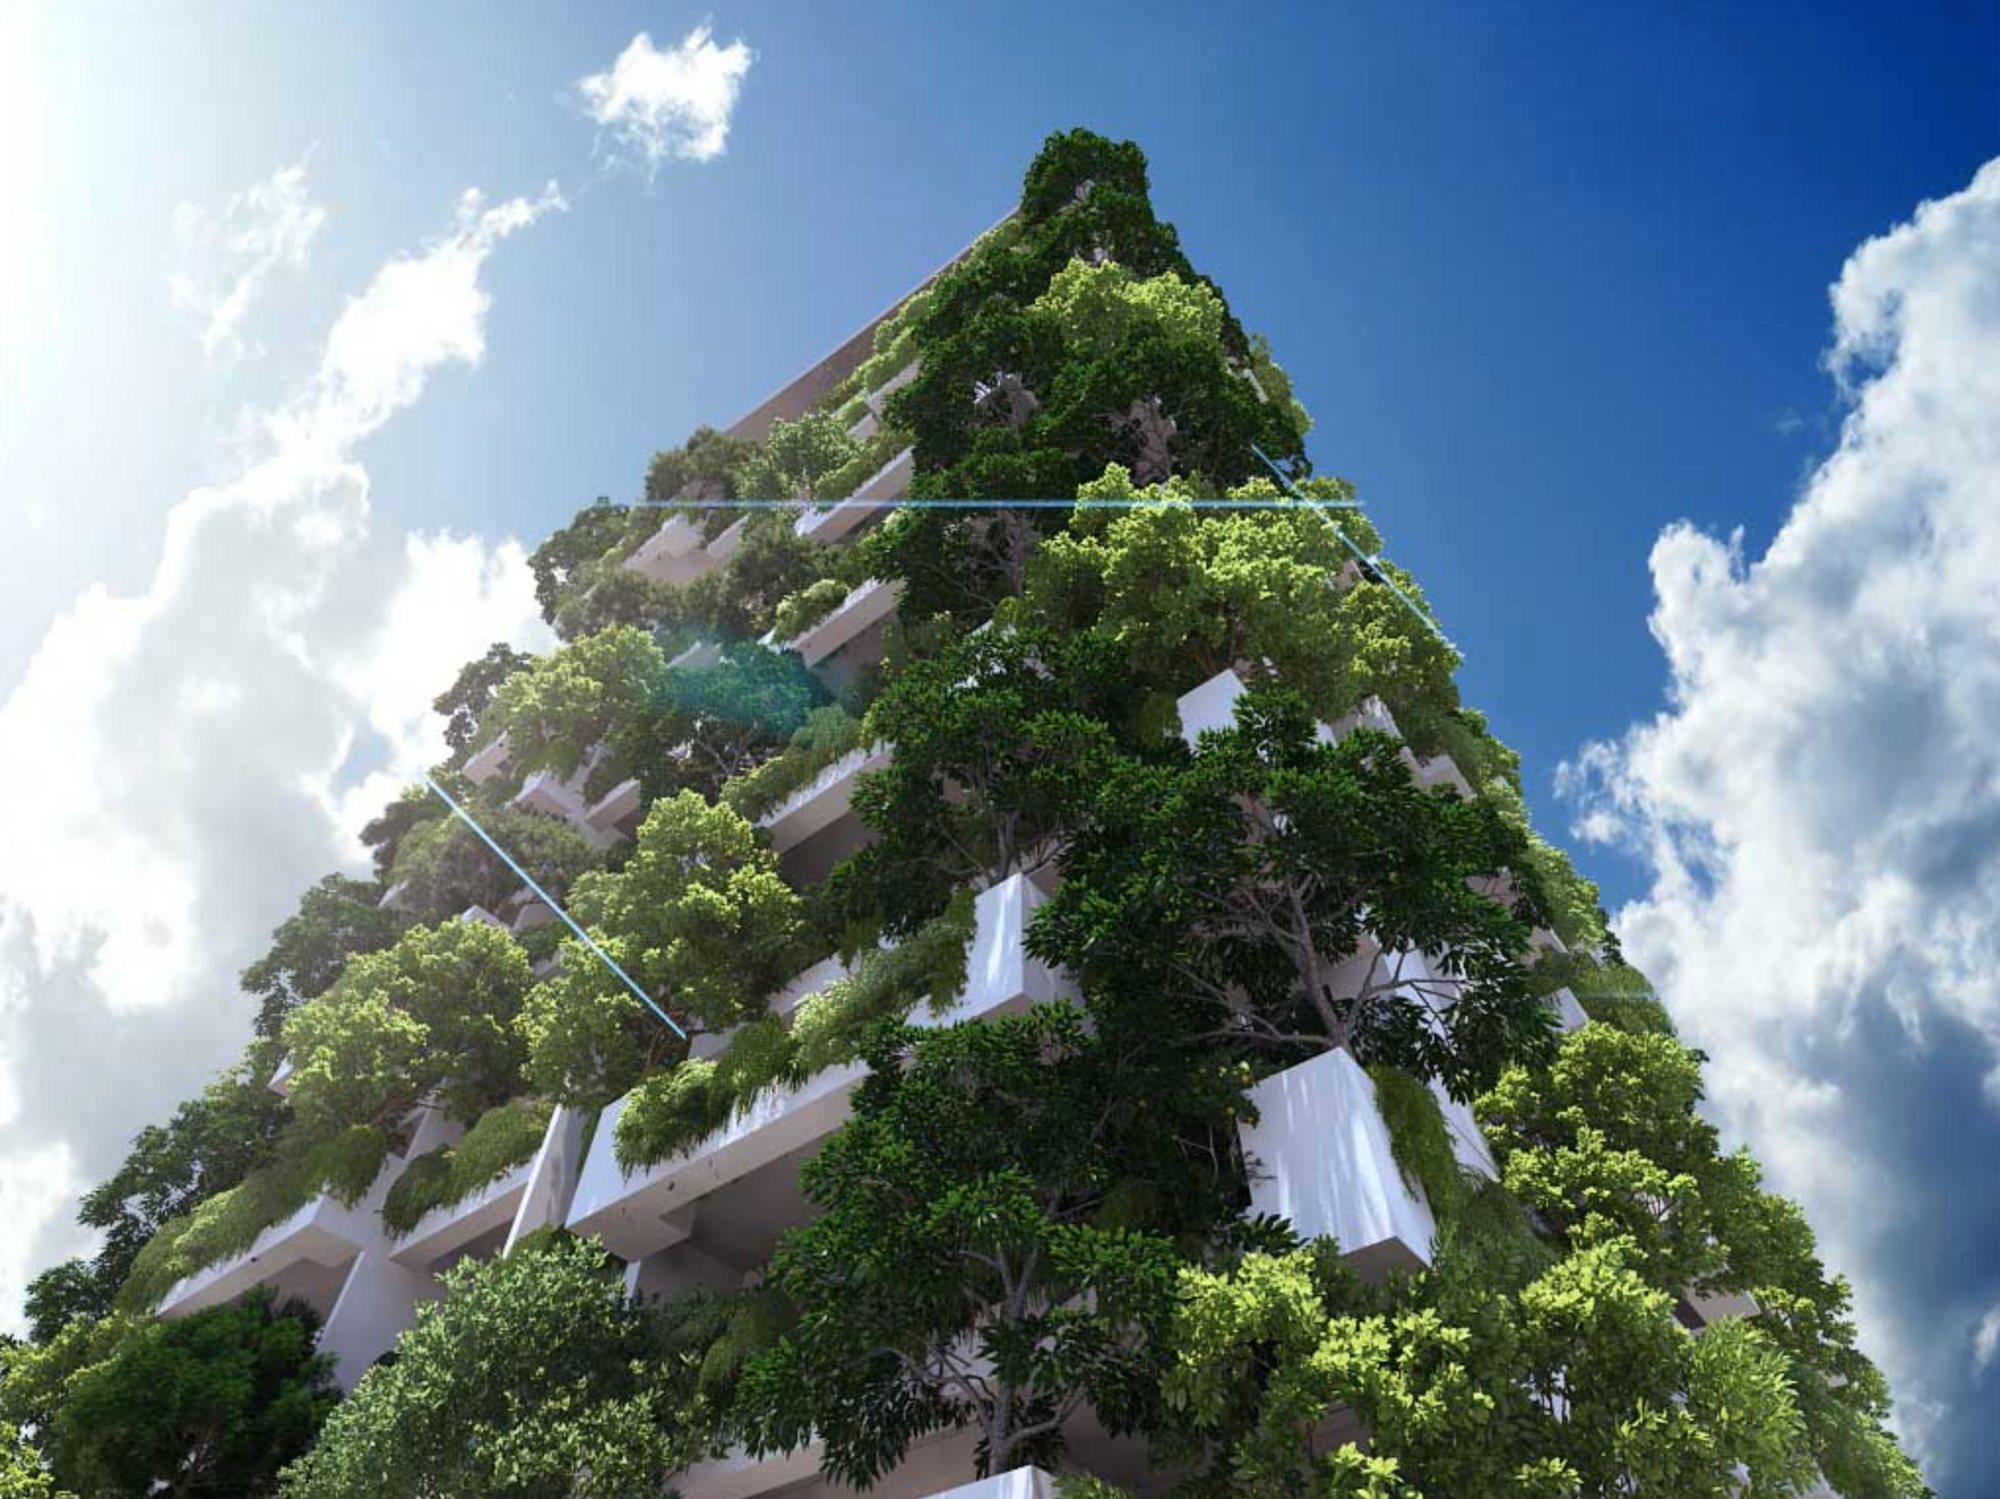 “Verdant Heights: High-Rise Haven with Lush Gardens”